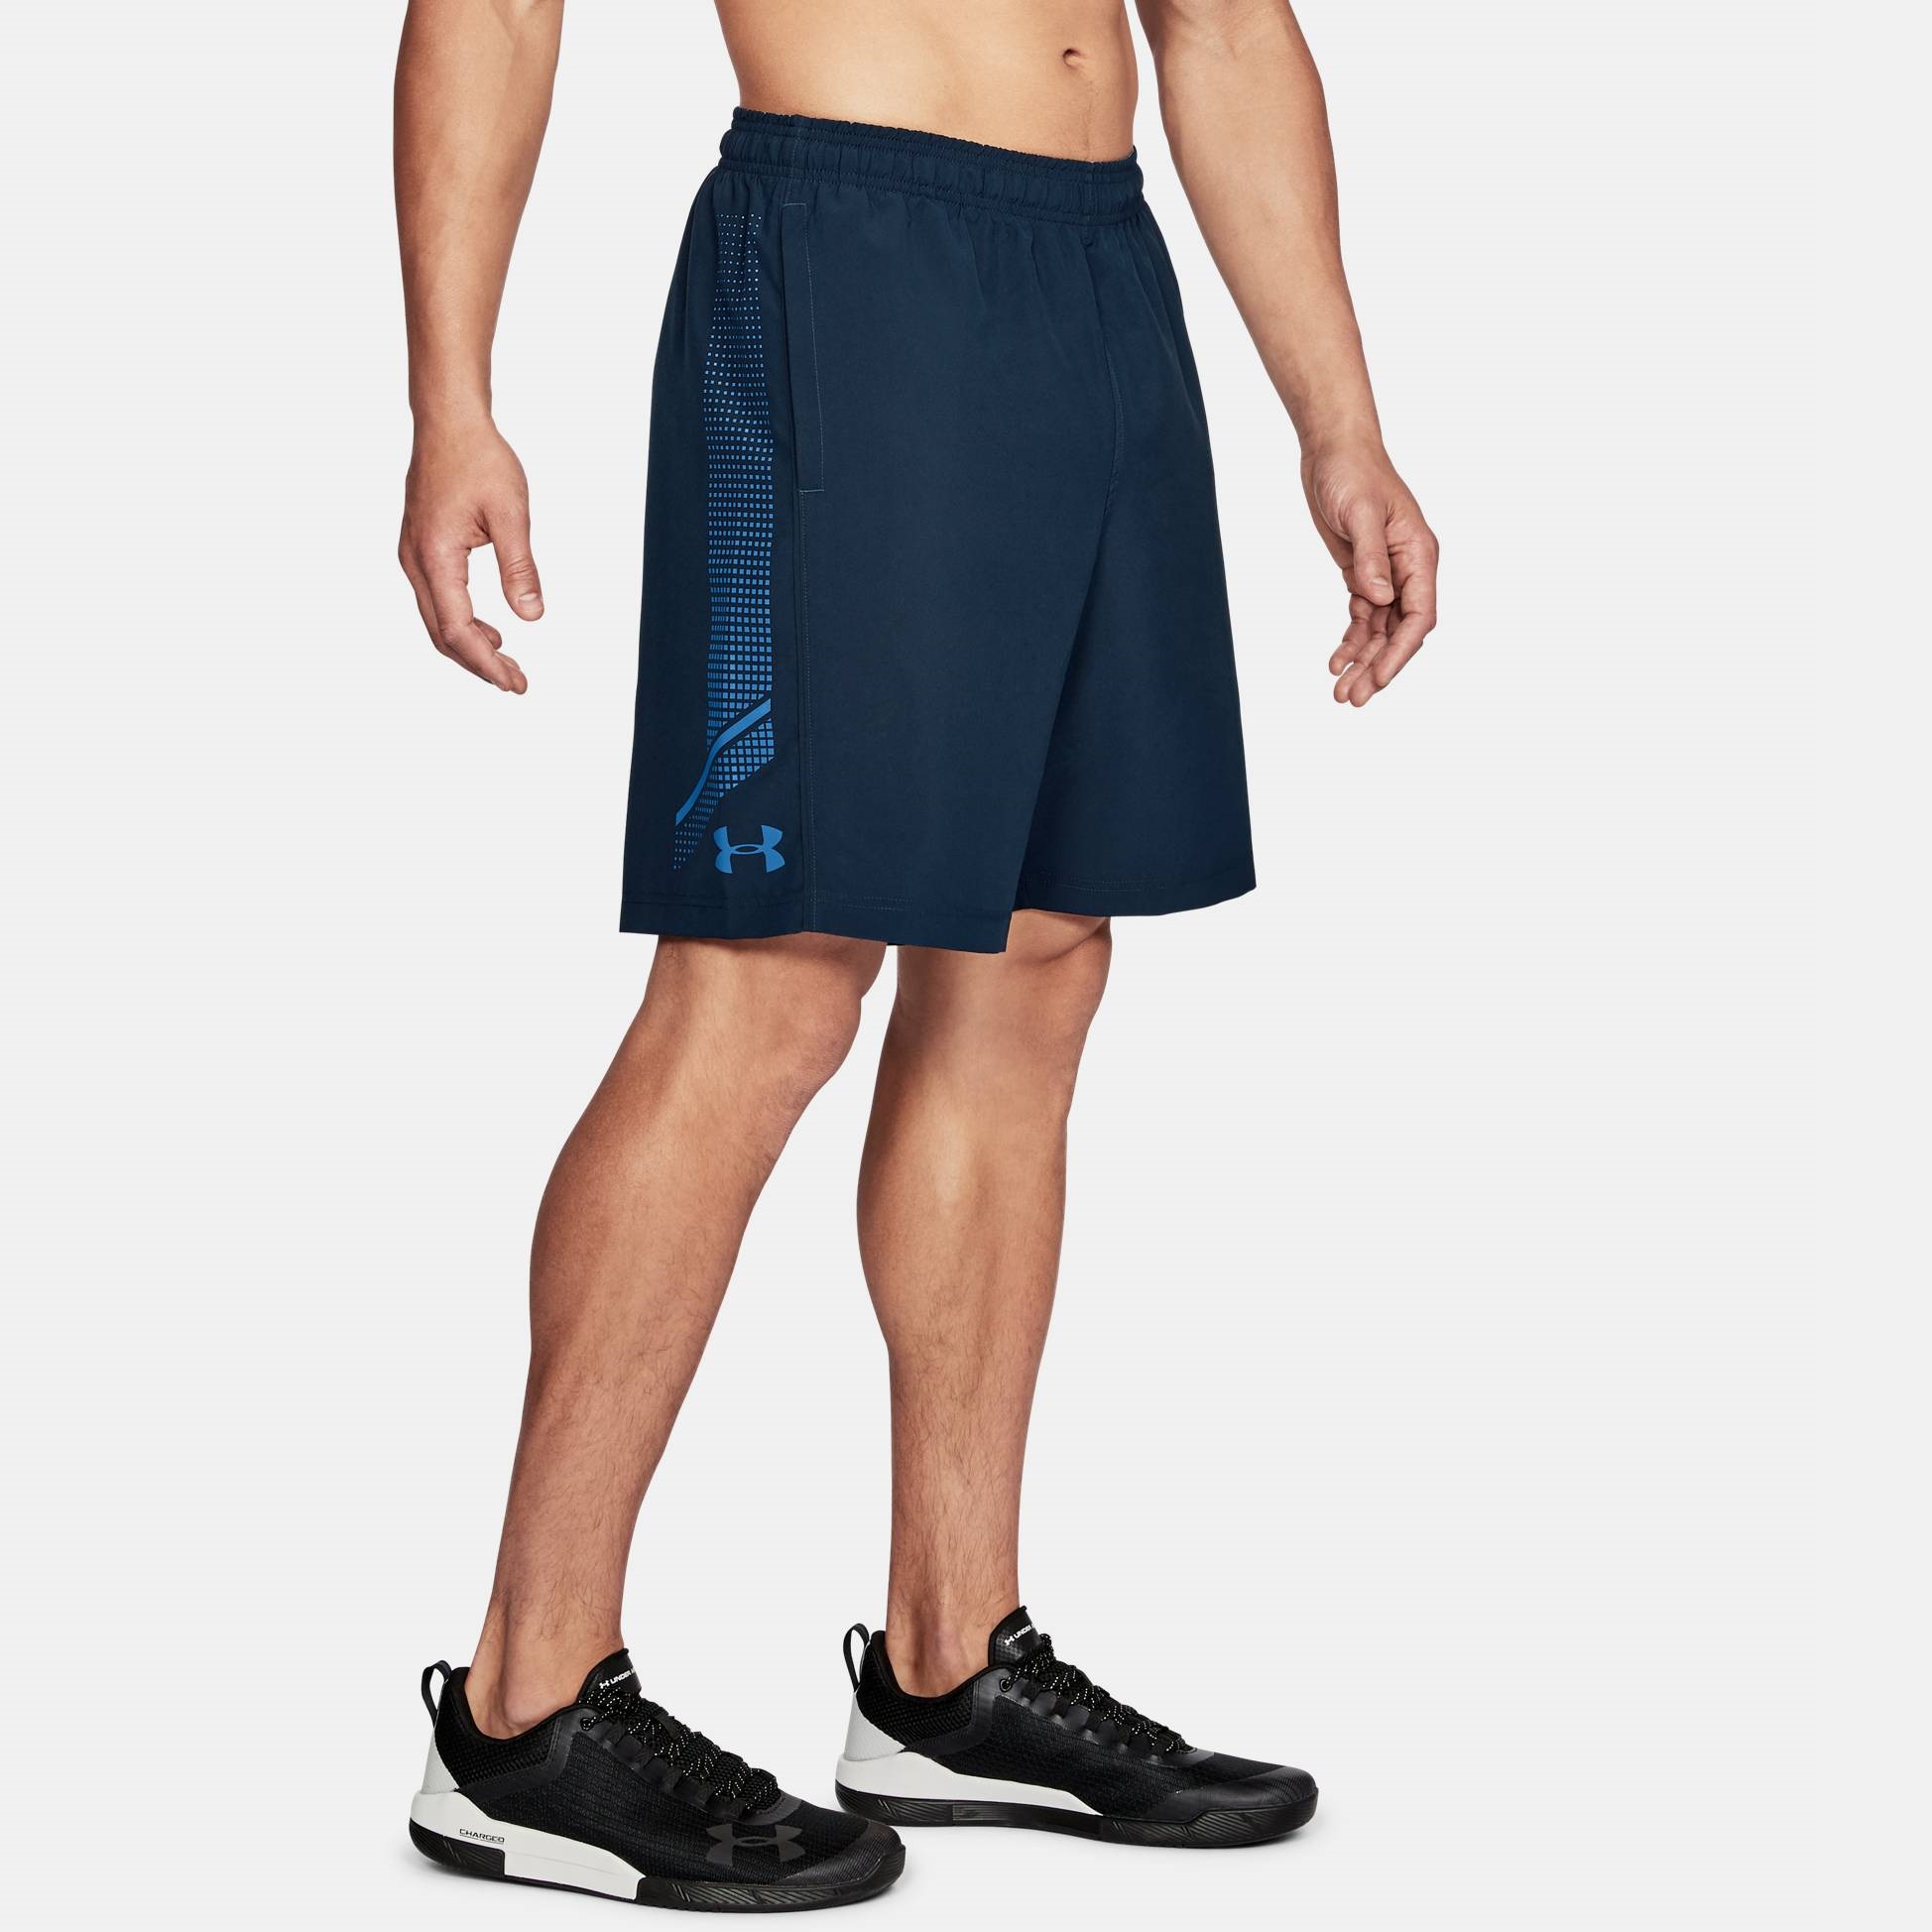  -  under armour Woven Graphic Shorts 9651